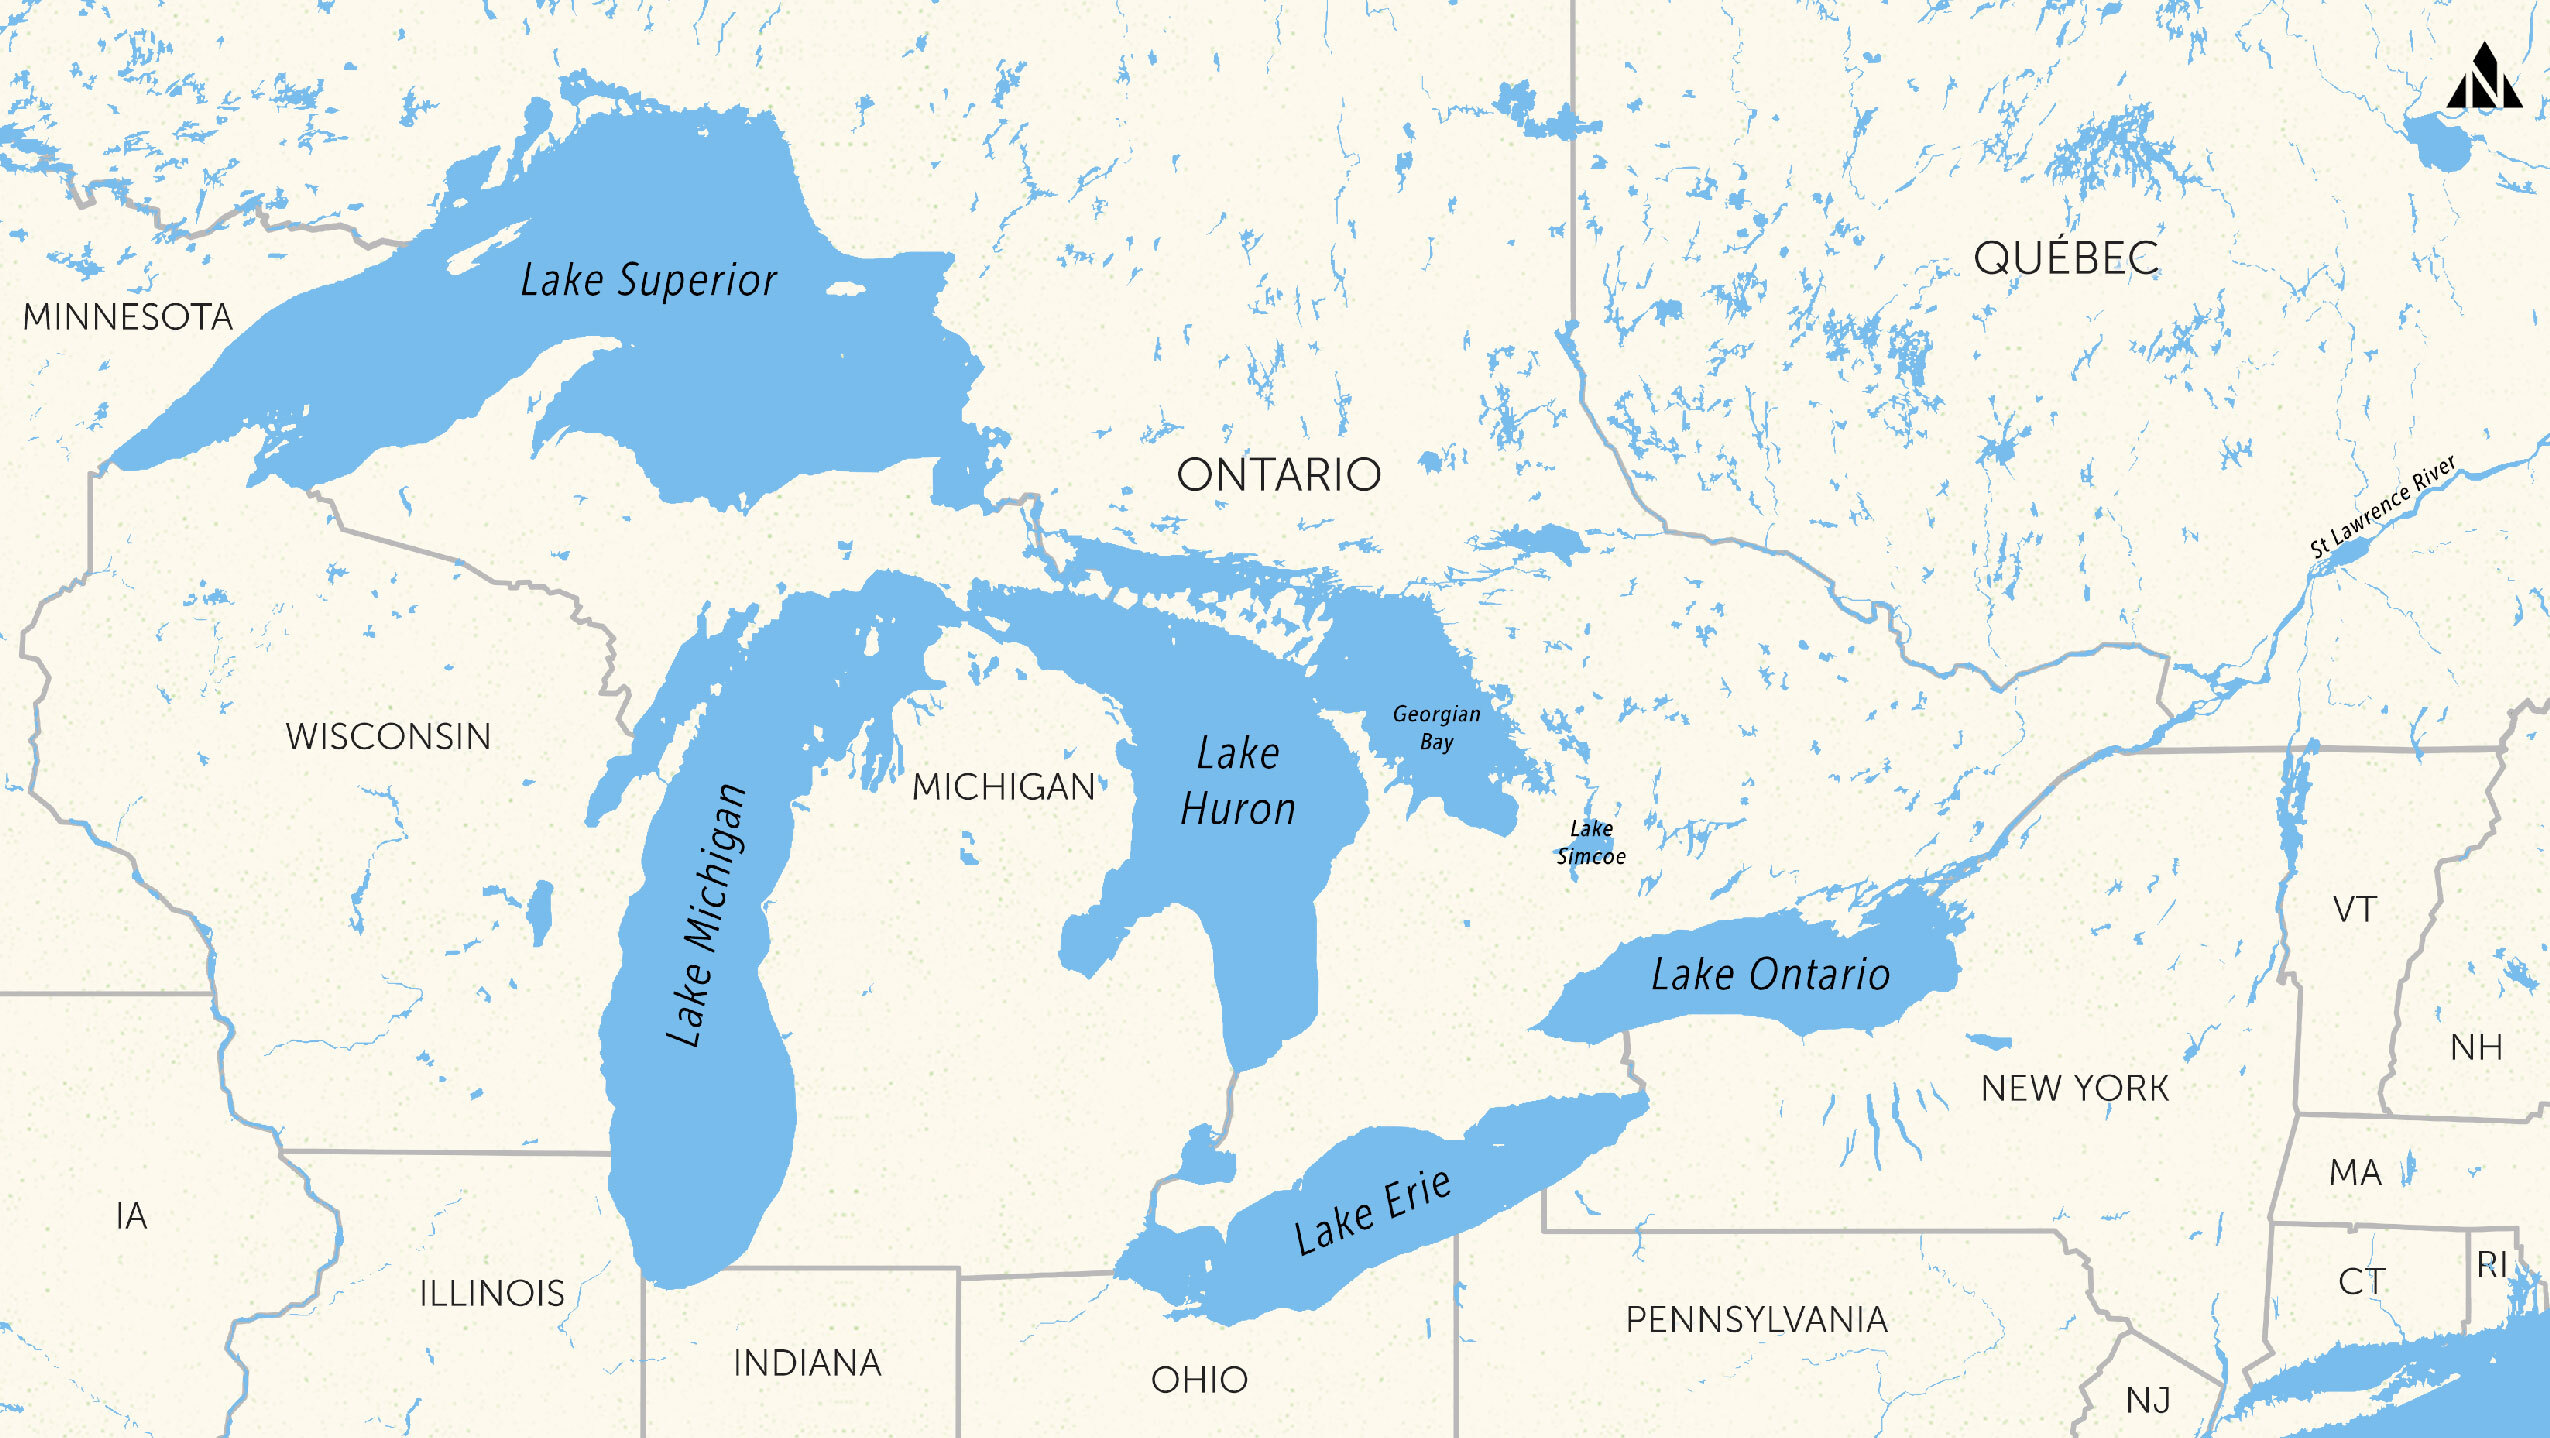 Map of the Great Lakes and surrounding states and provinces